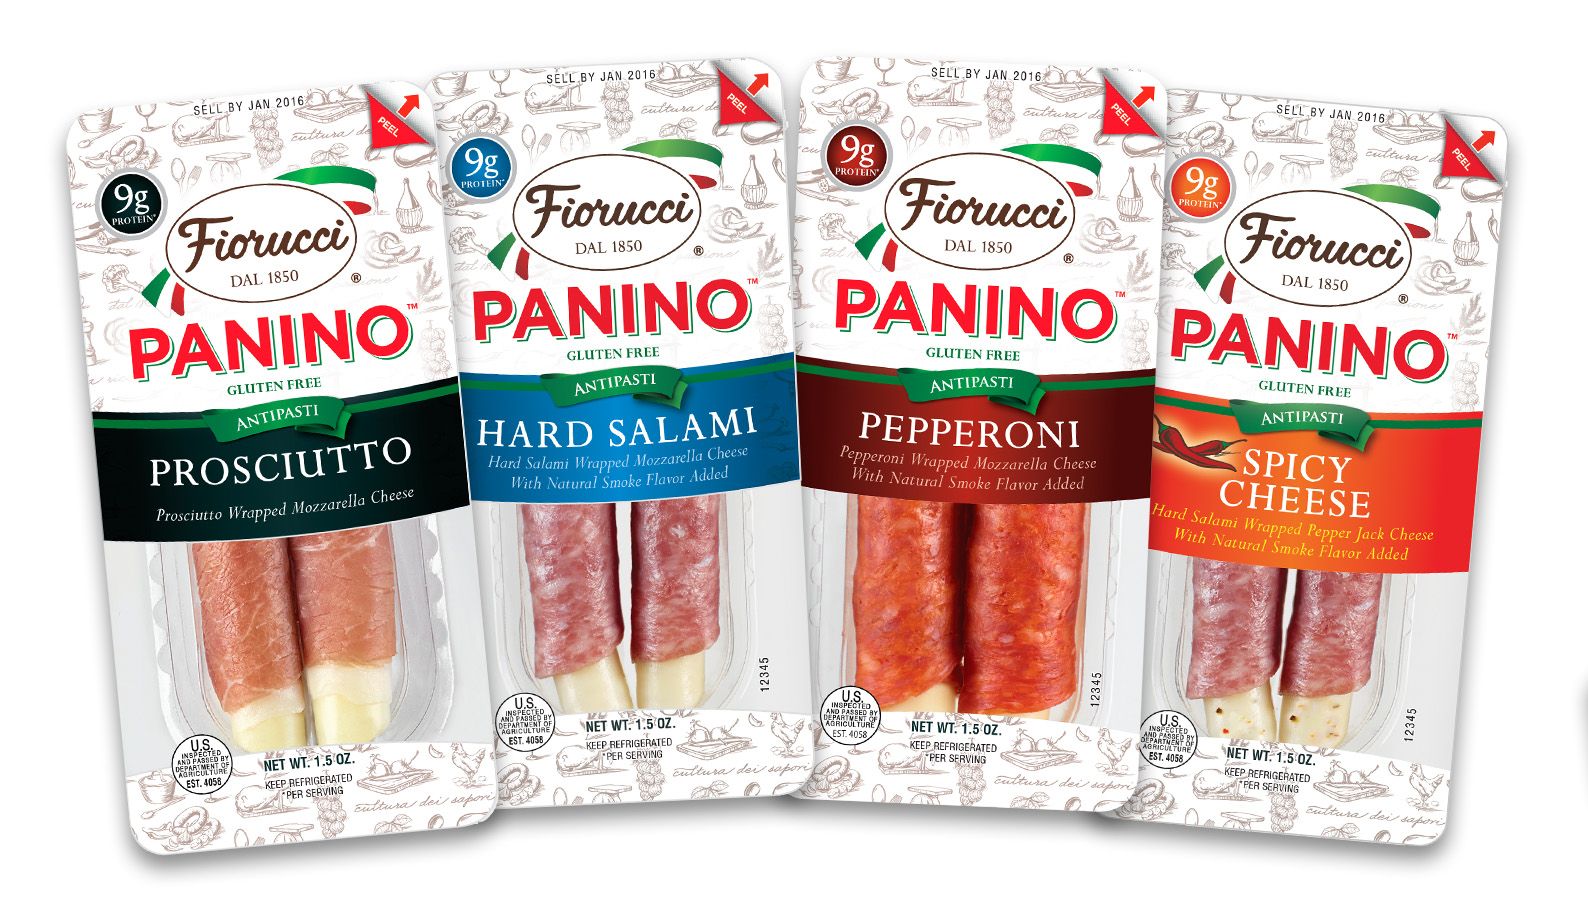 Fiorucci Paninos—authentic Italian cured meats wrapped around tasty cheese—make an easy on-the-go, gluten free snack that gives a burst of energy without the sugar crash. One of our new favorites! | Cool Mom Eats